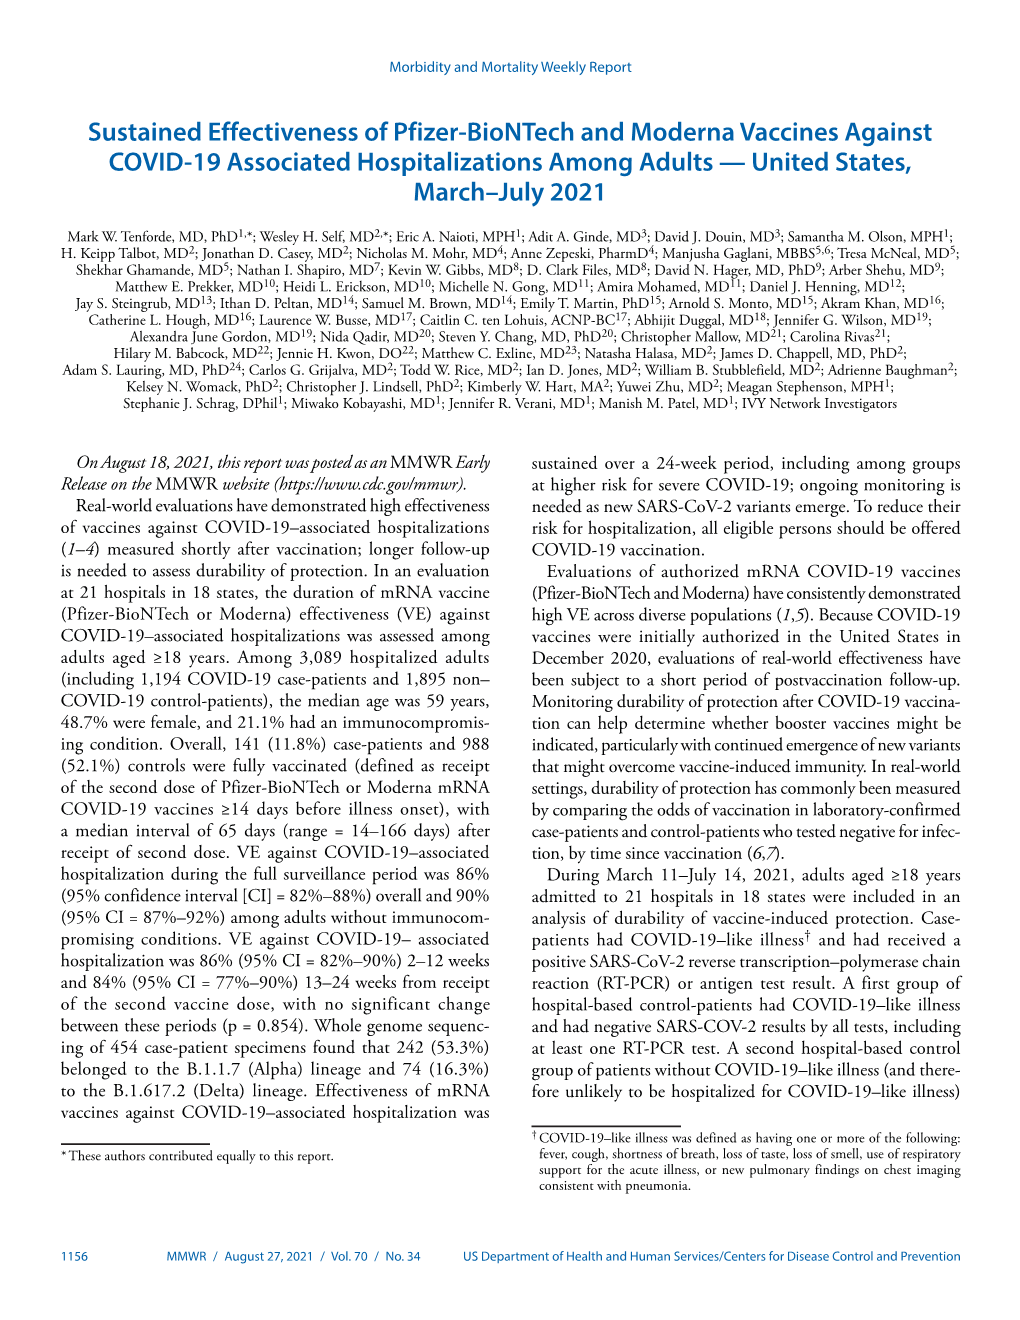 Sustained Effectiveness of Pfizer-Biontech and Moderna Vaccines Against COVID-19 Associated Hospitalizations Among Adults — United States, March–July 2021